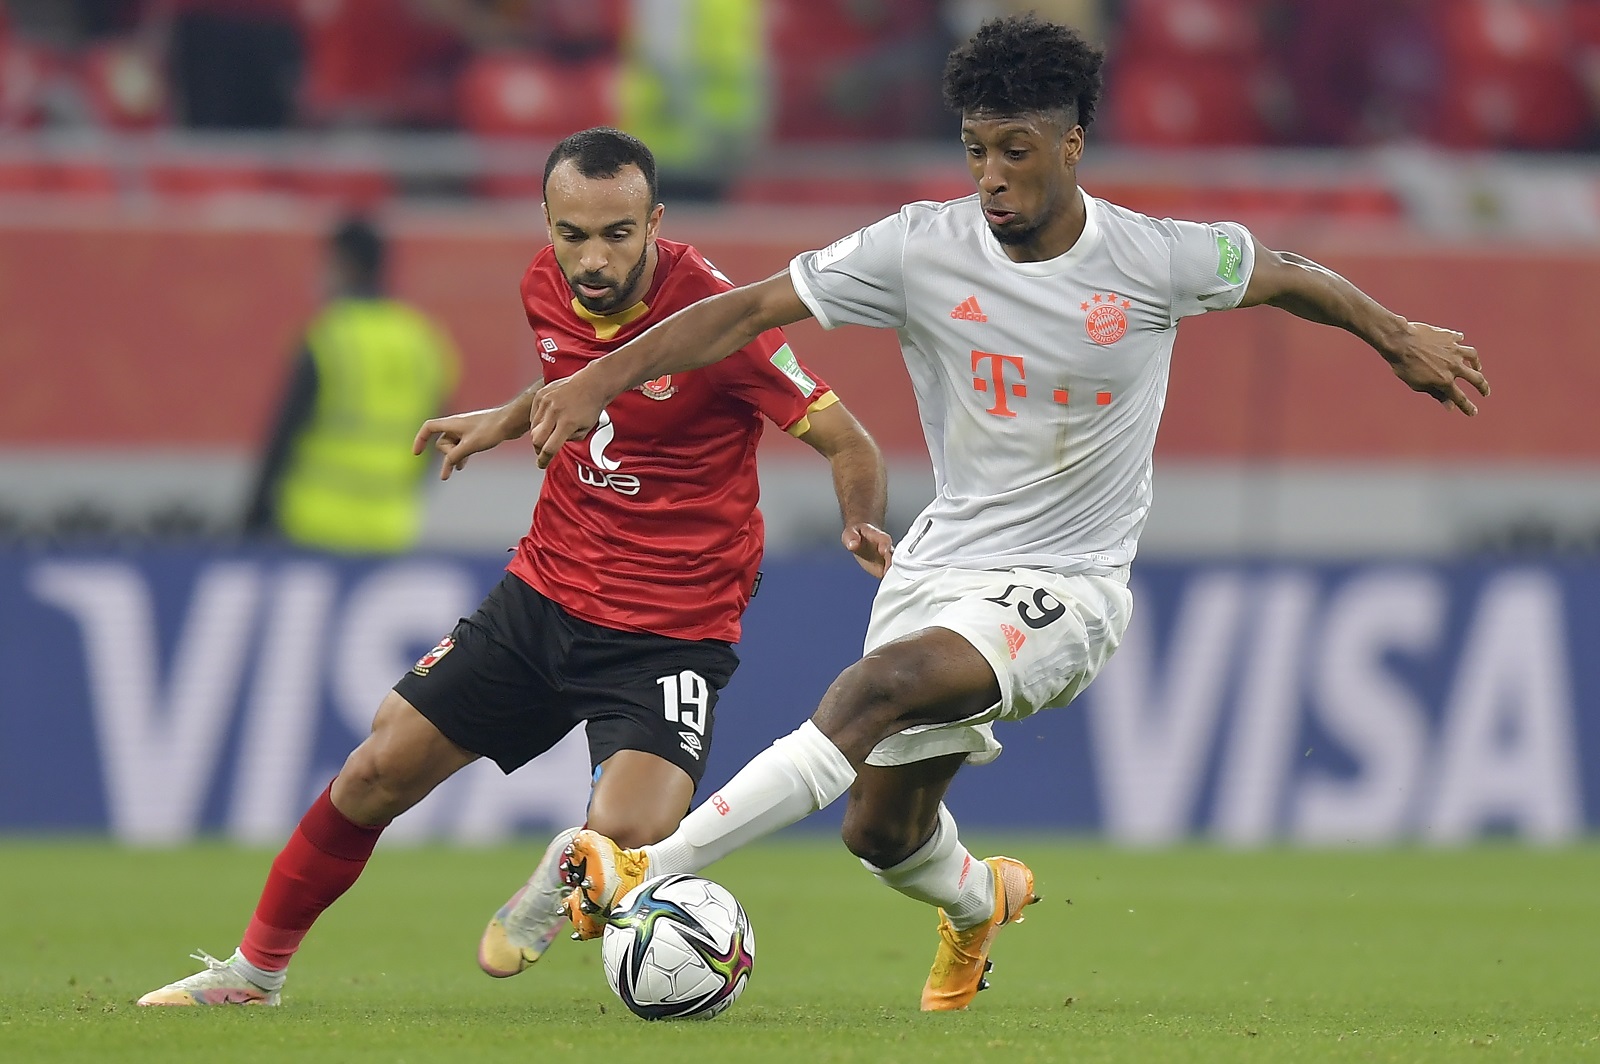 epa08997205 Kingsley Coman of Bayern in action against Mohamed Magdi Kafsha (L) of Al Ahly during the semi final soccer match between Al Ahly SC and Bayern Munich at the FIFA Club World Cup in Al Rayyan, Qatar, 08 February 2021.  EPA/NOUSHAD THEKKAYIL